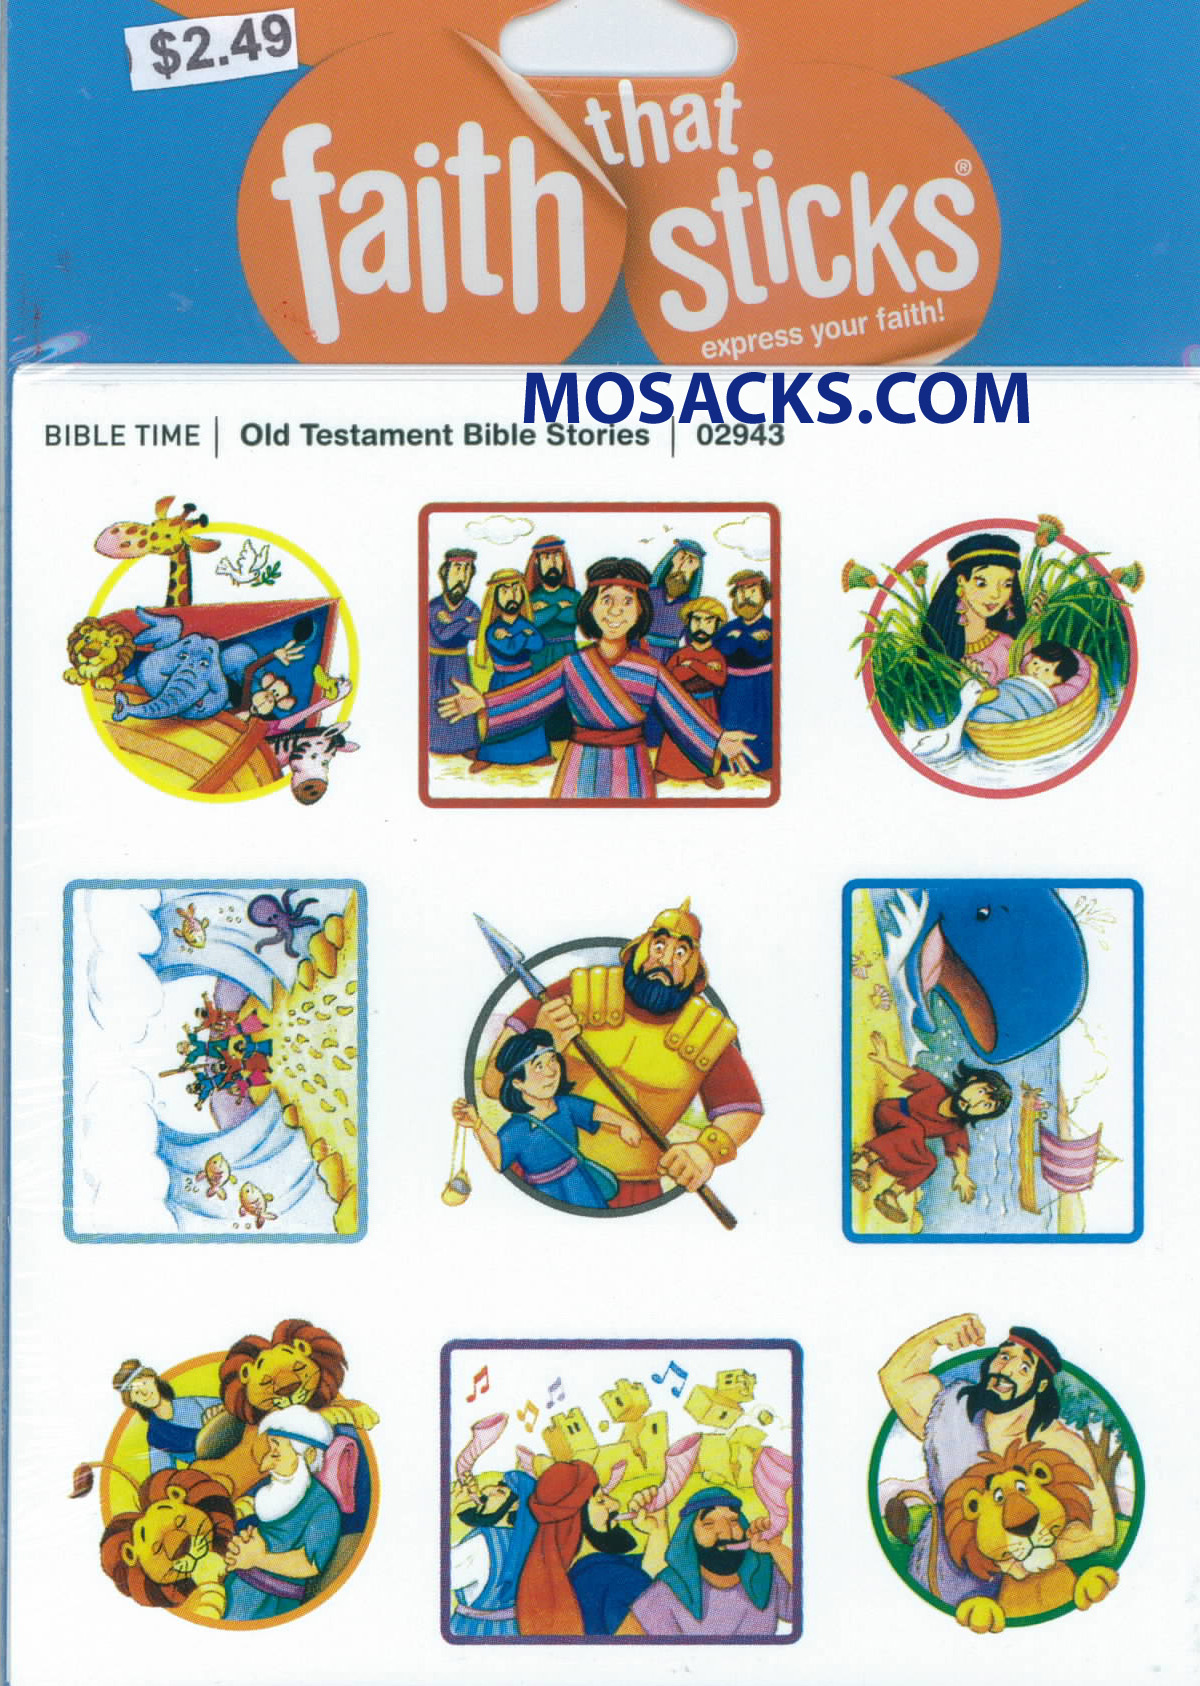 Christian Sticker  Faith That Sticks Old Testament Bible Stories 87-02943 includes 6 Old Testament sticker sheets